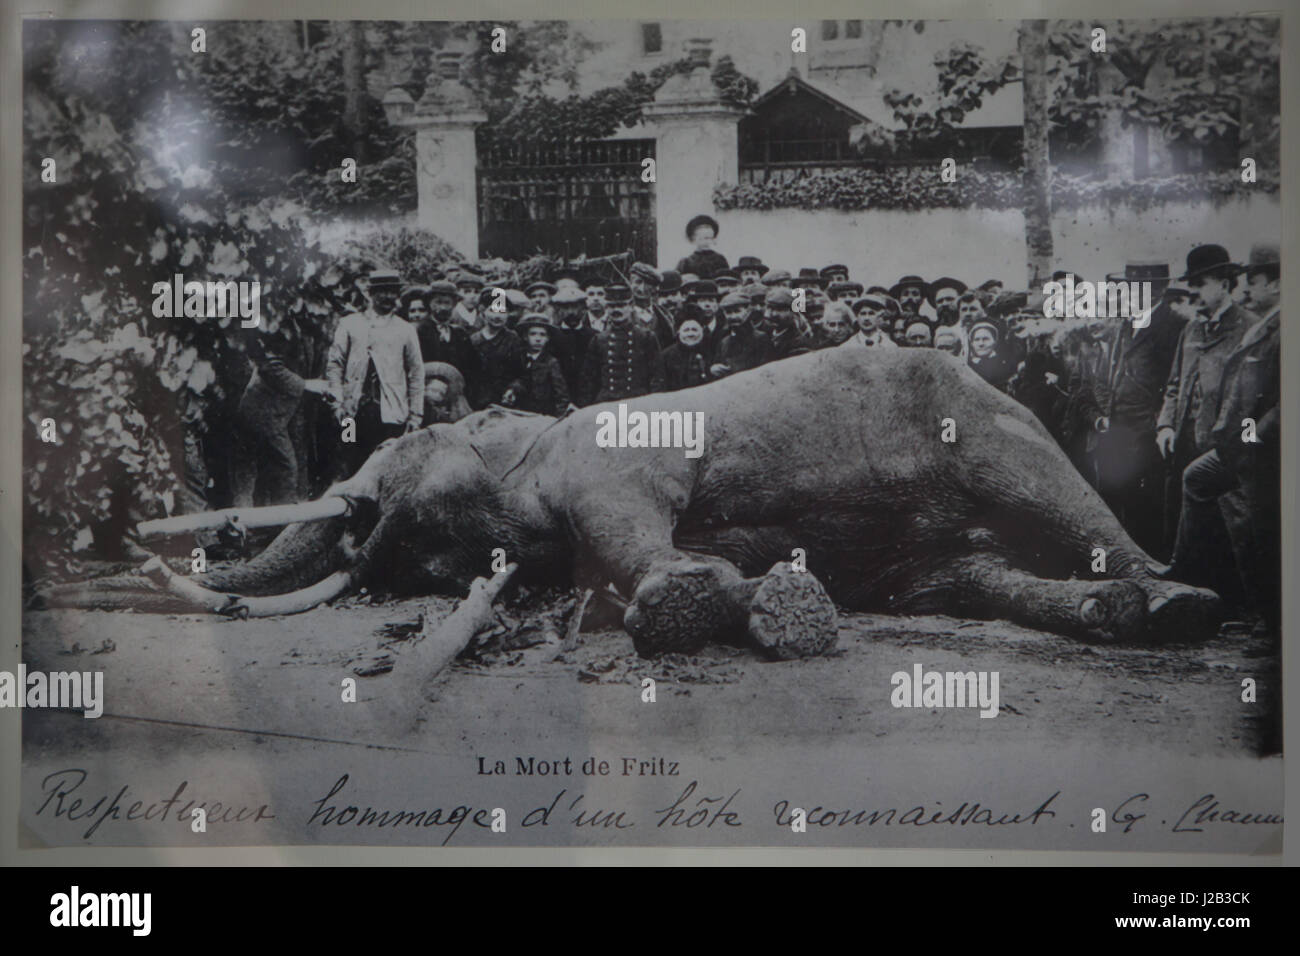 Dead elephant called Fritz pictured shortly after it was killed in Tours, France, on 11th June 1902. Indian elephant (Elephas maximus indicus) called Fritz served as a circus animal in the Barnum & Bailey Circus. The elephant was strangled due to aggressiveness during the Circus European Tour. The stuffed elephant is now displayed in the Musee des Beaux-Arts de Tours (Museum of Fine Arts) in Tours, Indre-et-Loire, France. Stock Photo